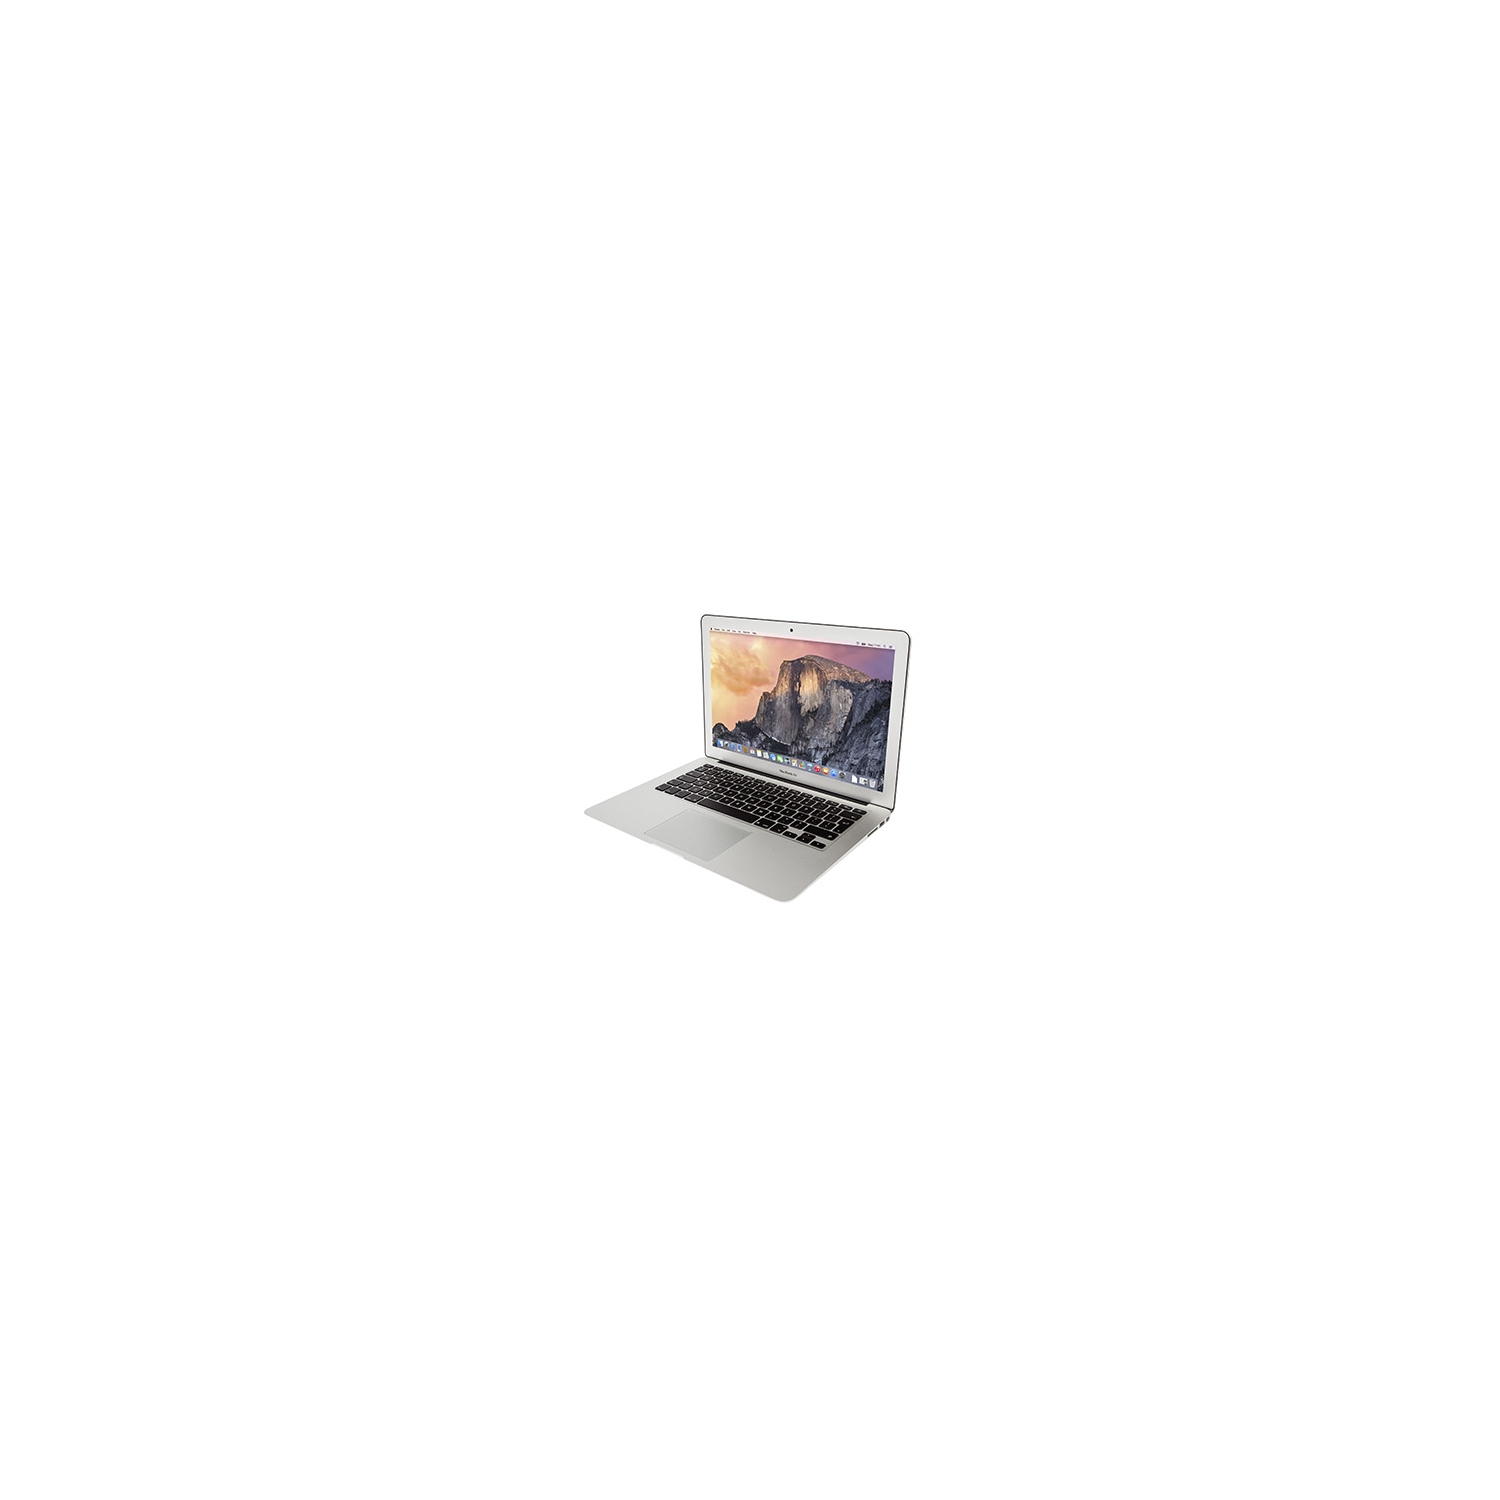 Refurbished (Excellent) - Apple MacBook Air 13" Intel Core i5 (1.4GHz) / 4GB / 128GB - (2014 Model) - (Excellent Condition, 9/10)